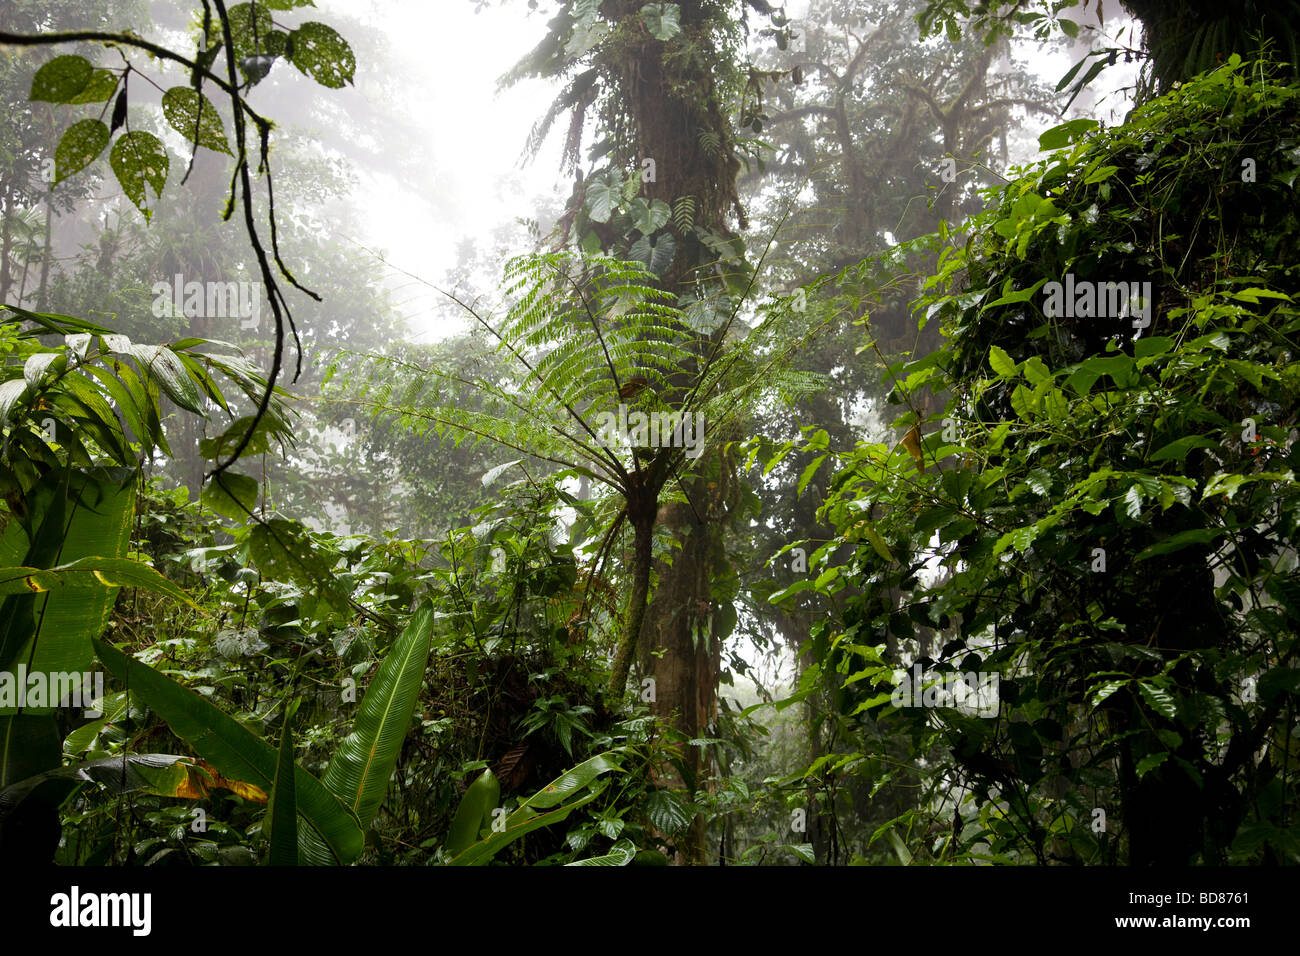 Giant Fern (Angiopteris evecta) growing in the Santa Elena Cloud Forest Reserve, Costa Rica. Stock Photo